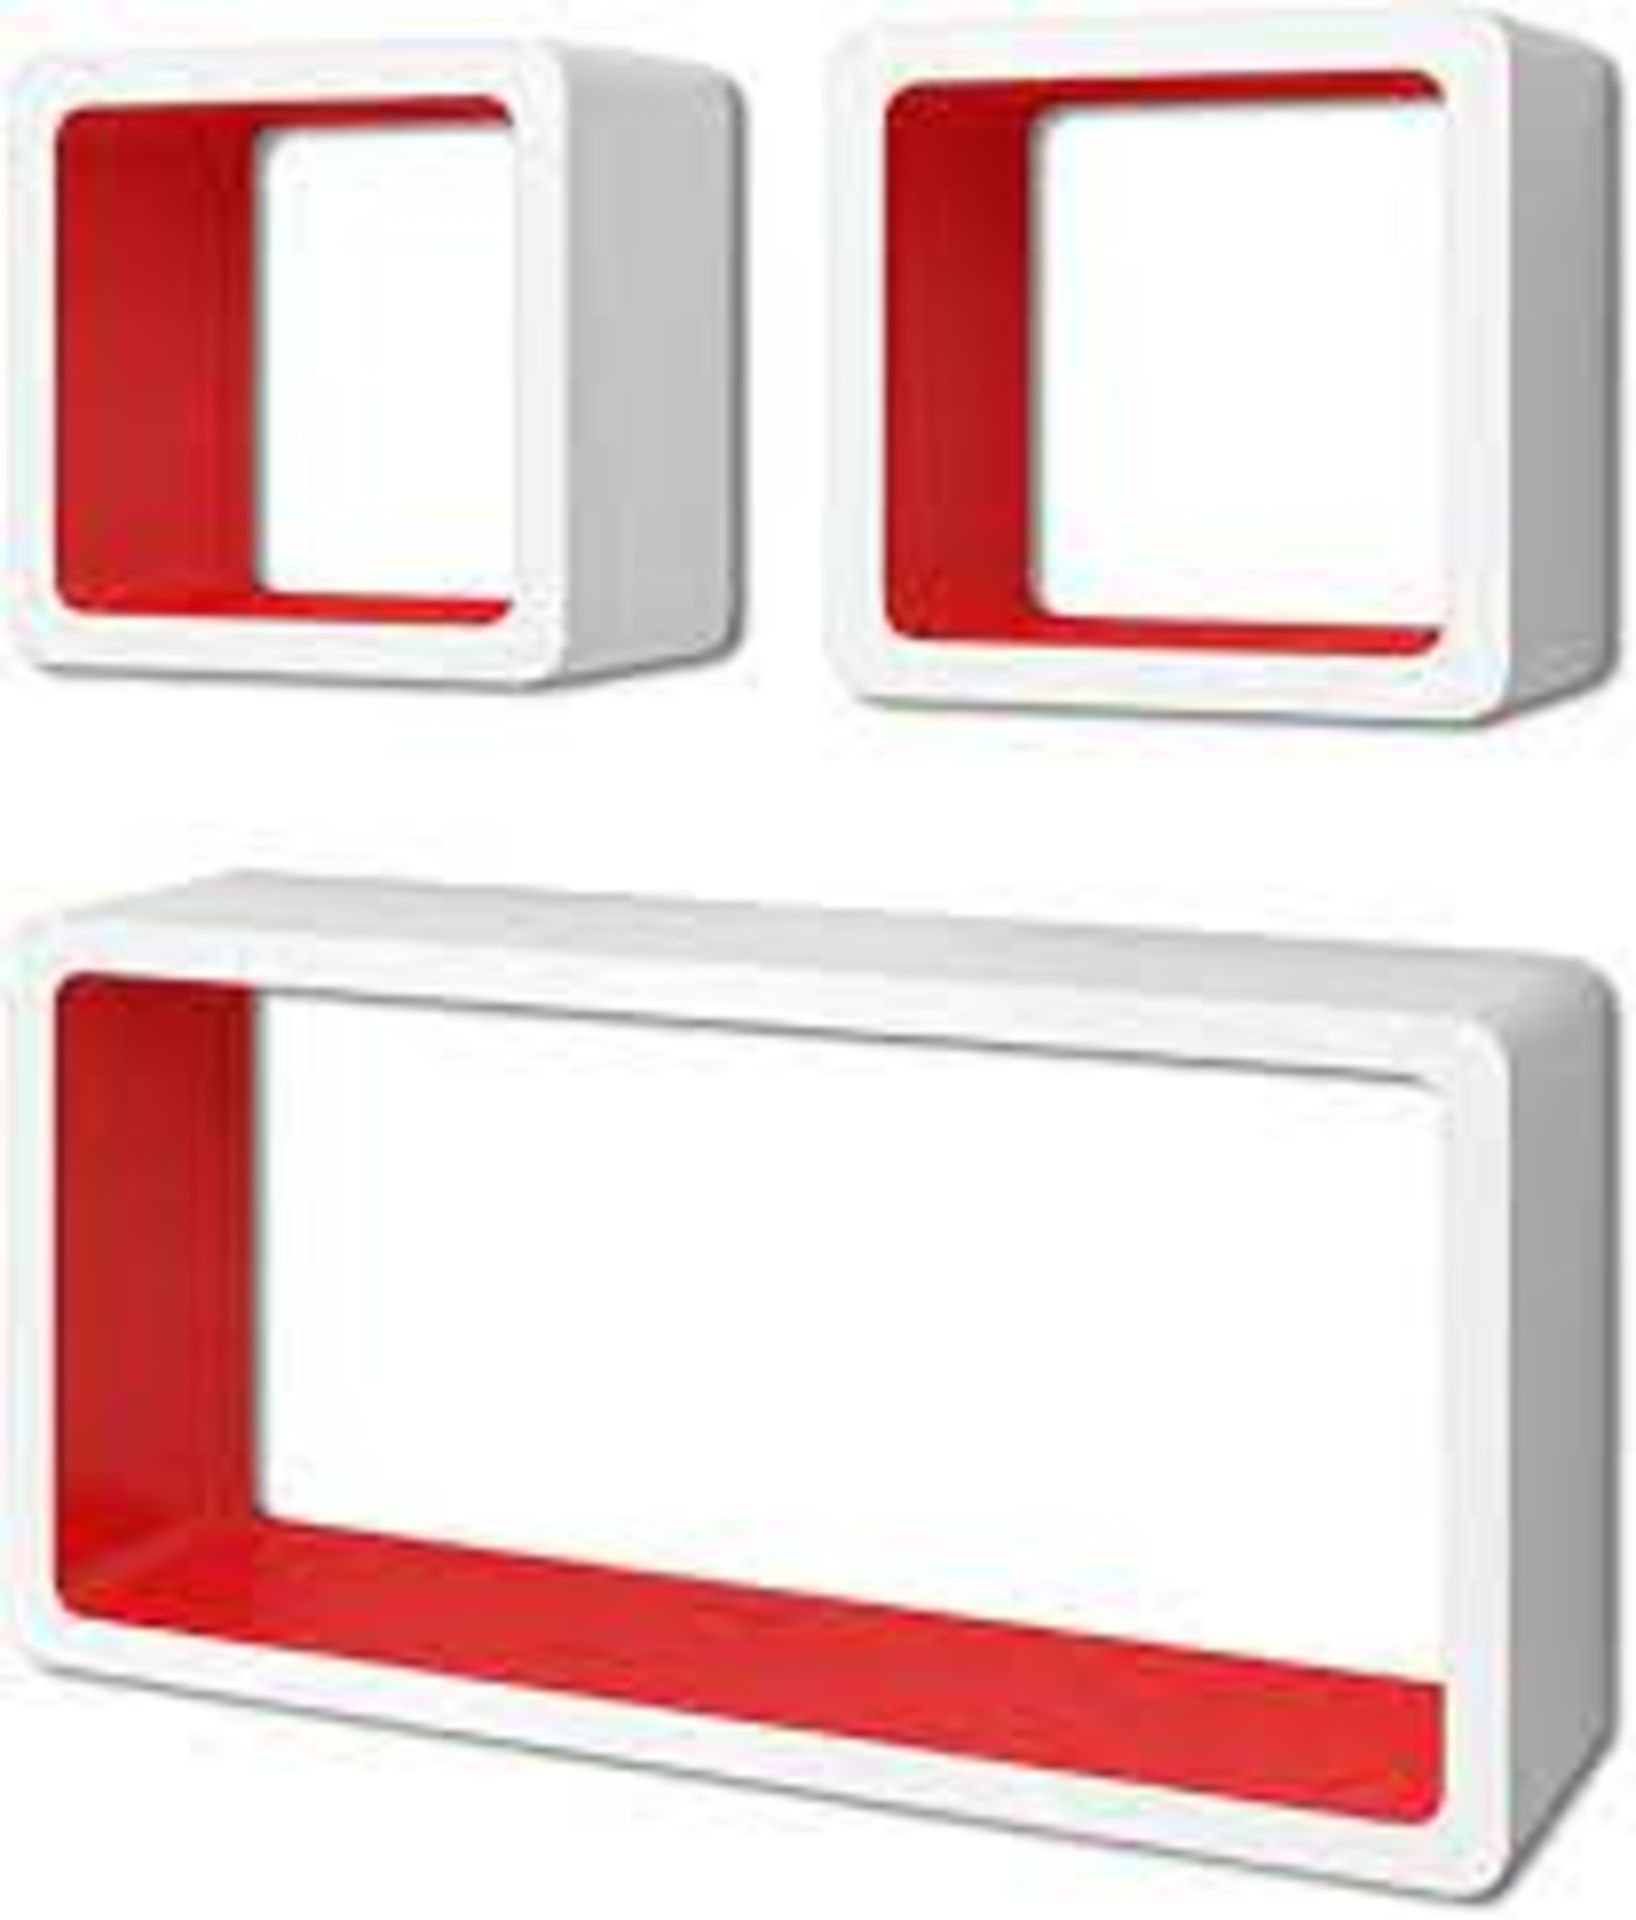 10 X NEW PACKAGED SETS OF 3 FLOATING WALL CUBE SHELFS IN WHITE & RED. HW-3P006W/R